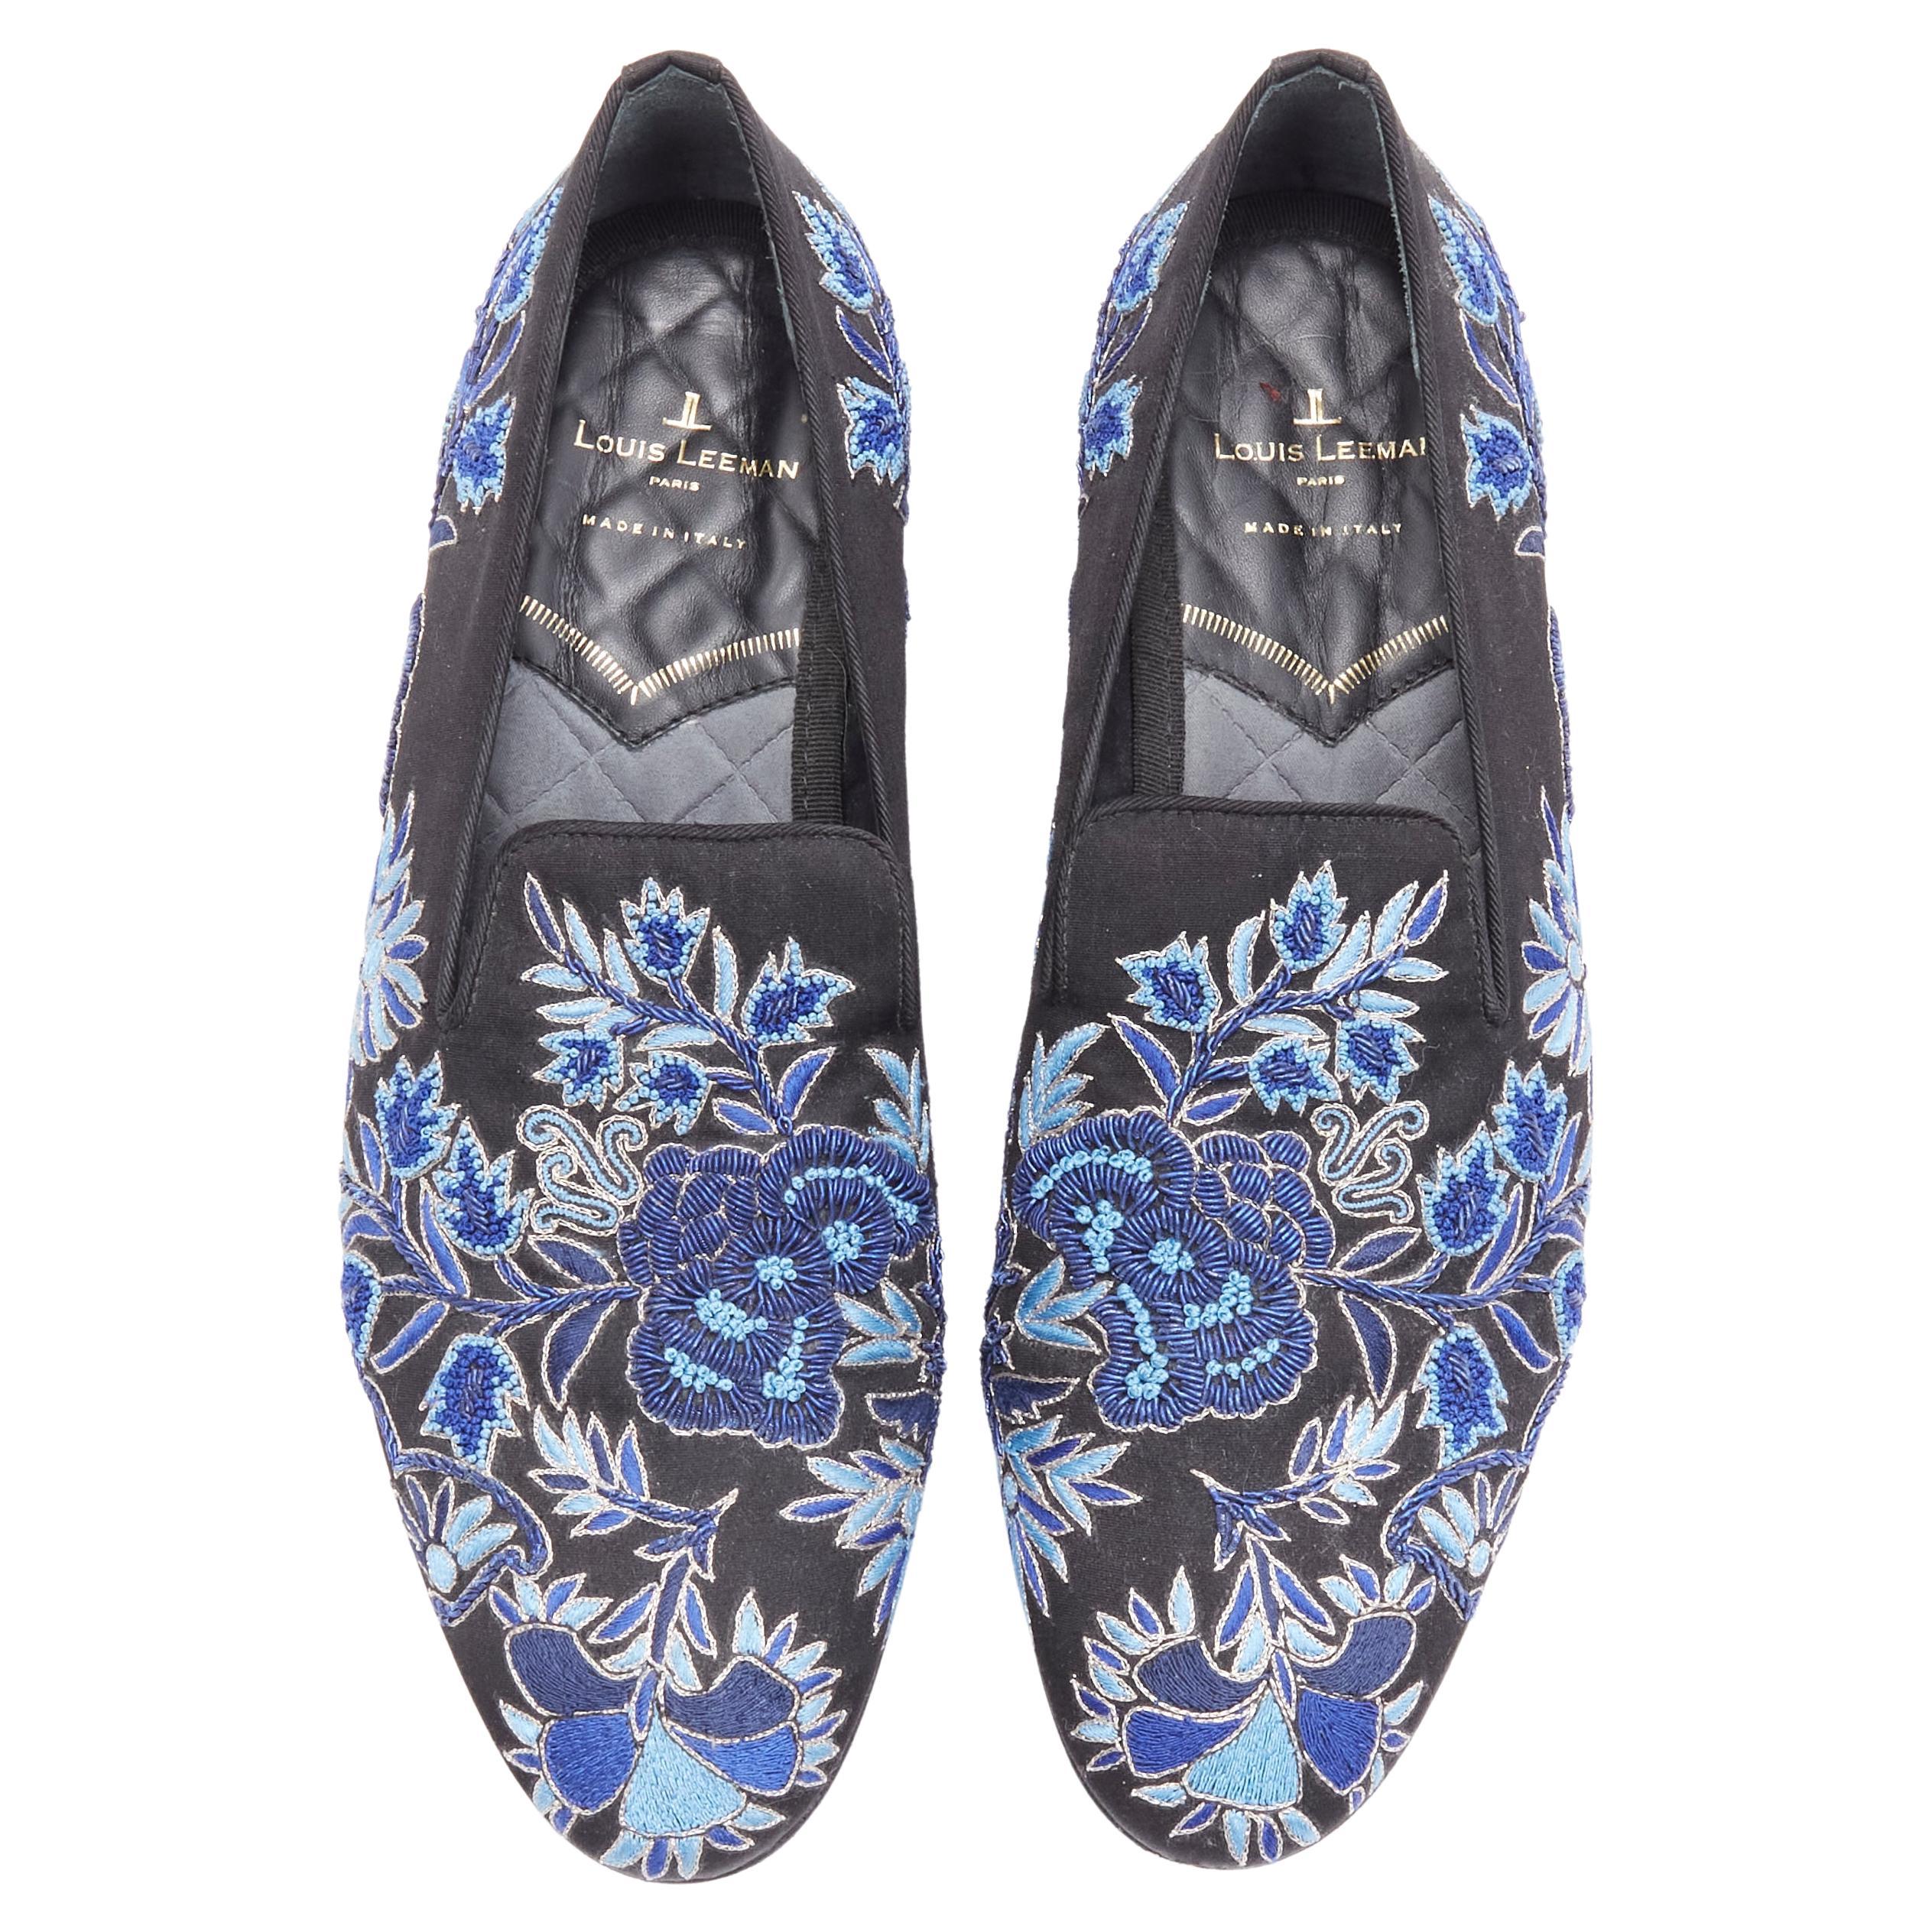 LOUIS LEEMAN black satin blue floral embroidery evening loafer EU42 US9
Reference: KNCN/A00012 
Brand: Louis Leeman 
Model: Embroidered loafers 
Material: Satin 
Color: Black 
Pattern: Floral 
Extra Detail: Black satin with blue embroidery. Slip on